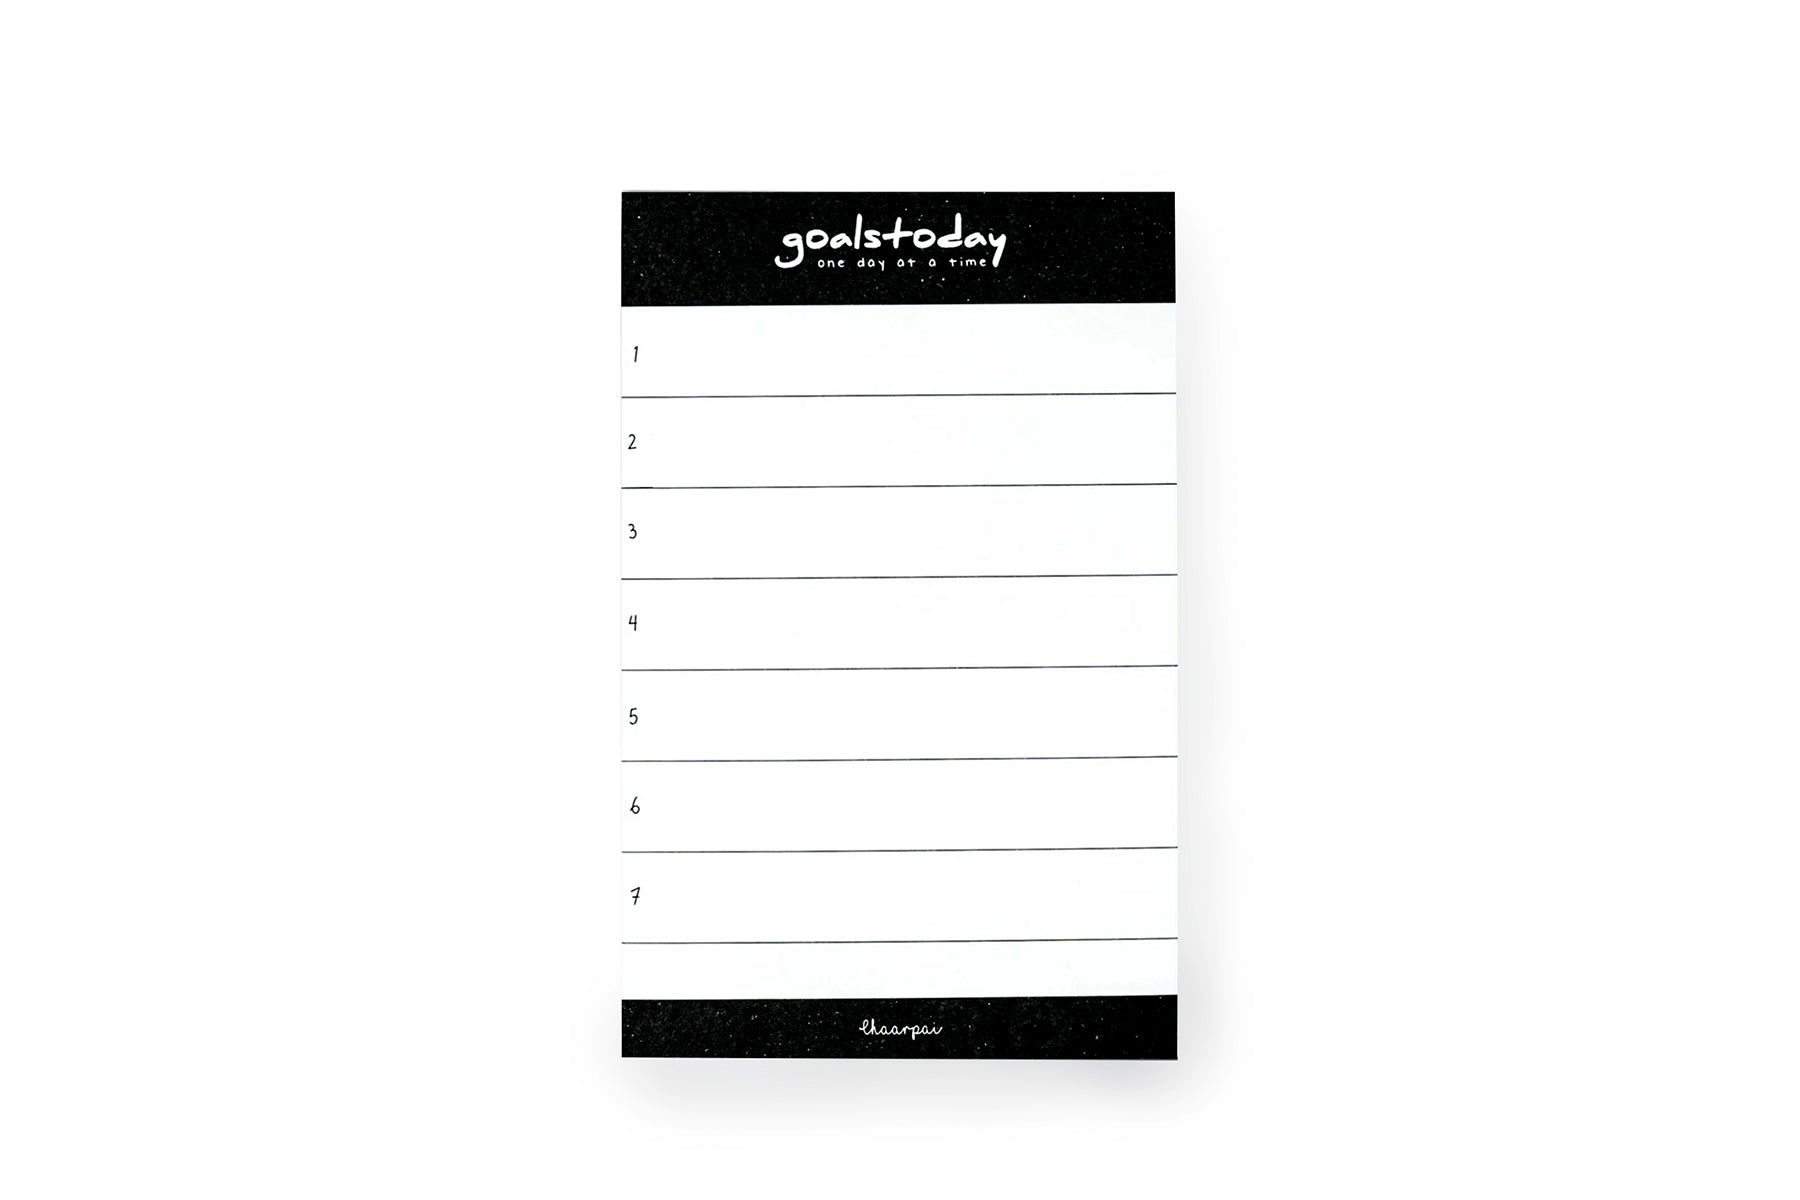 GOALS TODAY- NOTEPAD